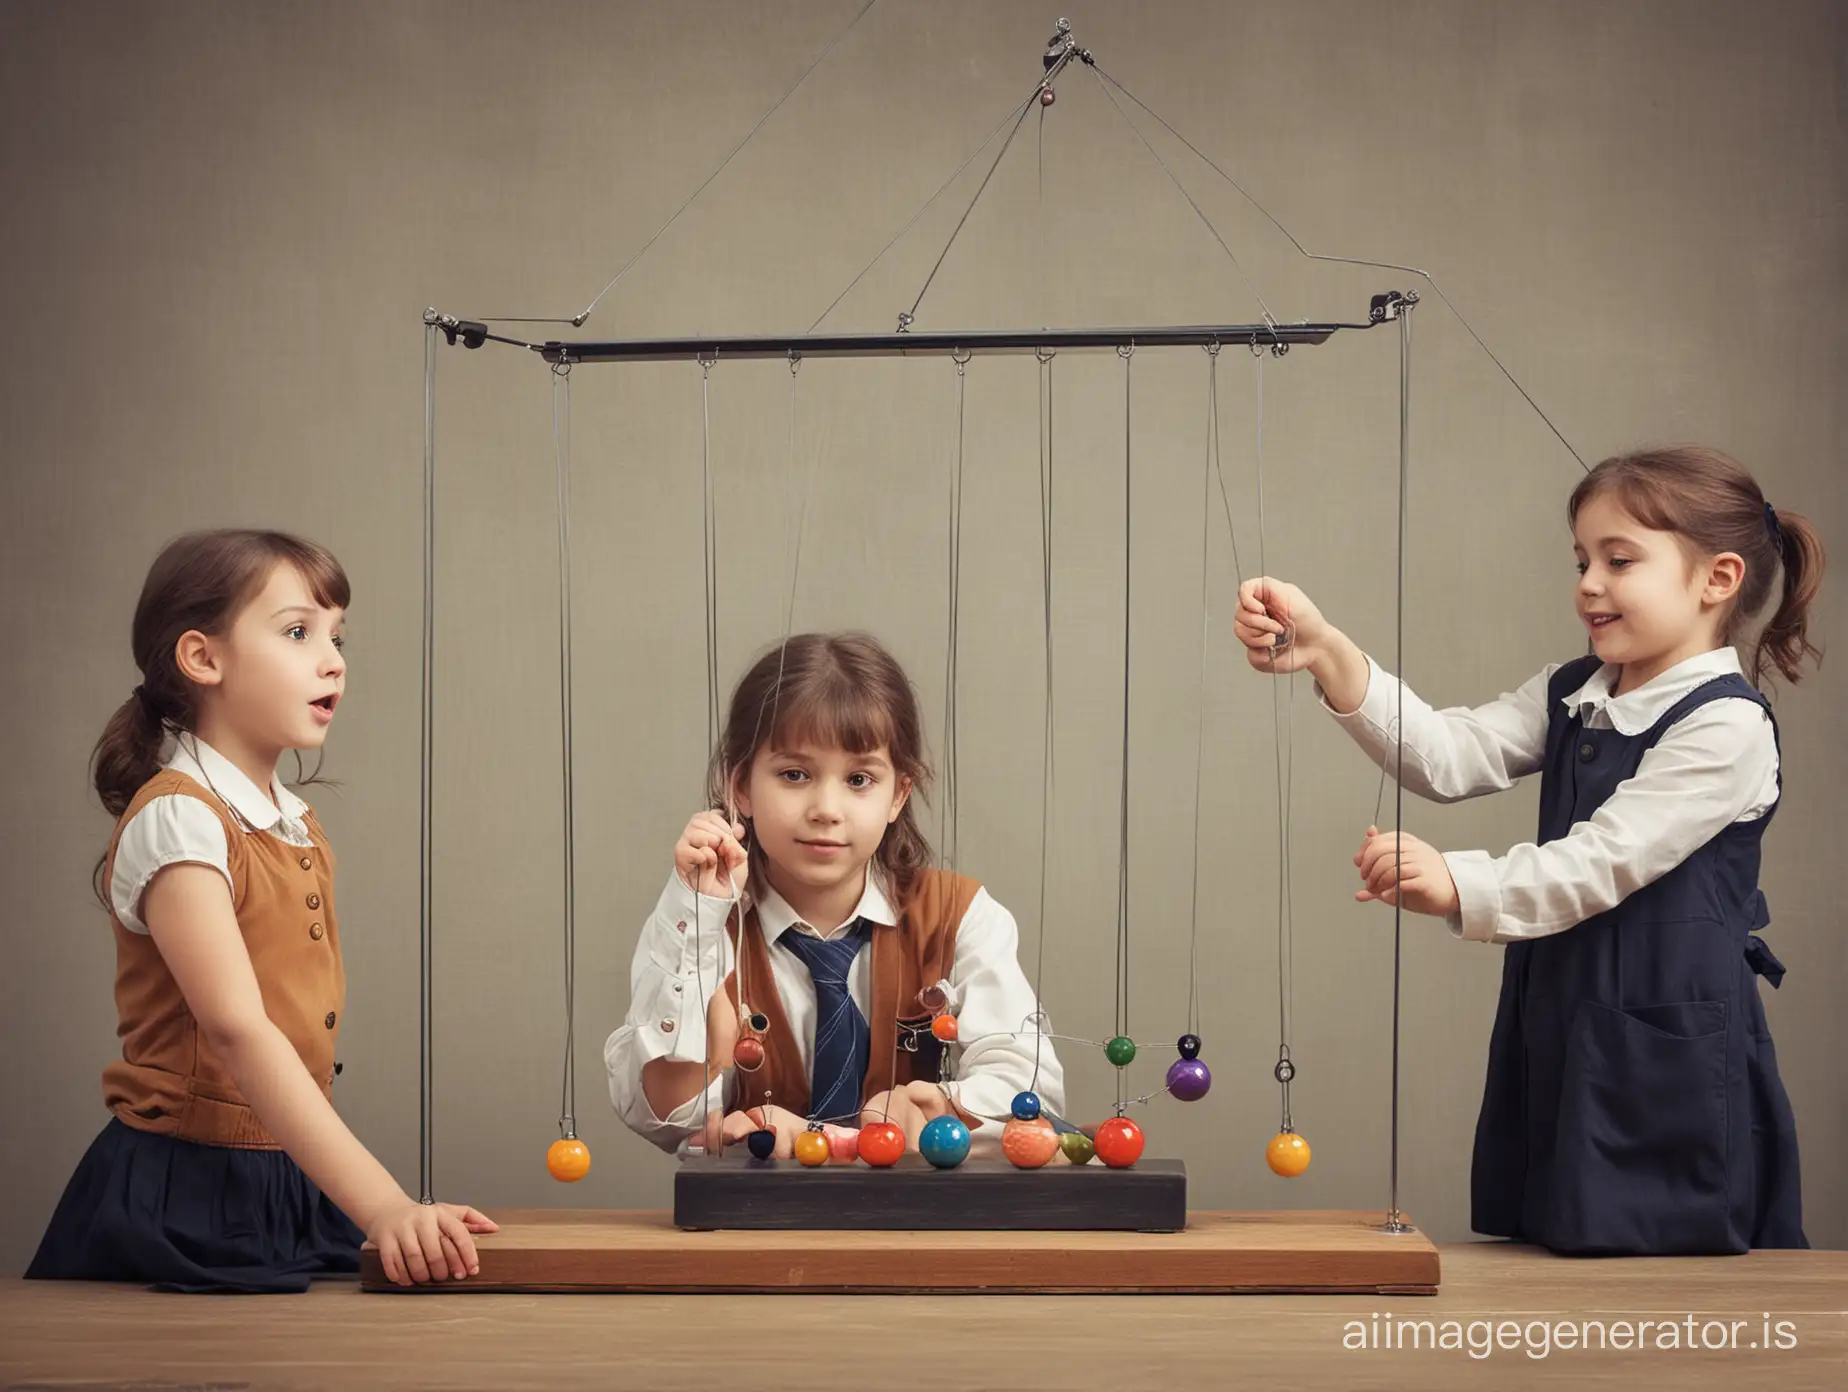 Kids-Playing-with-Newtons-Cradle-Toy-in-a-Playful-Physics-Experiment